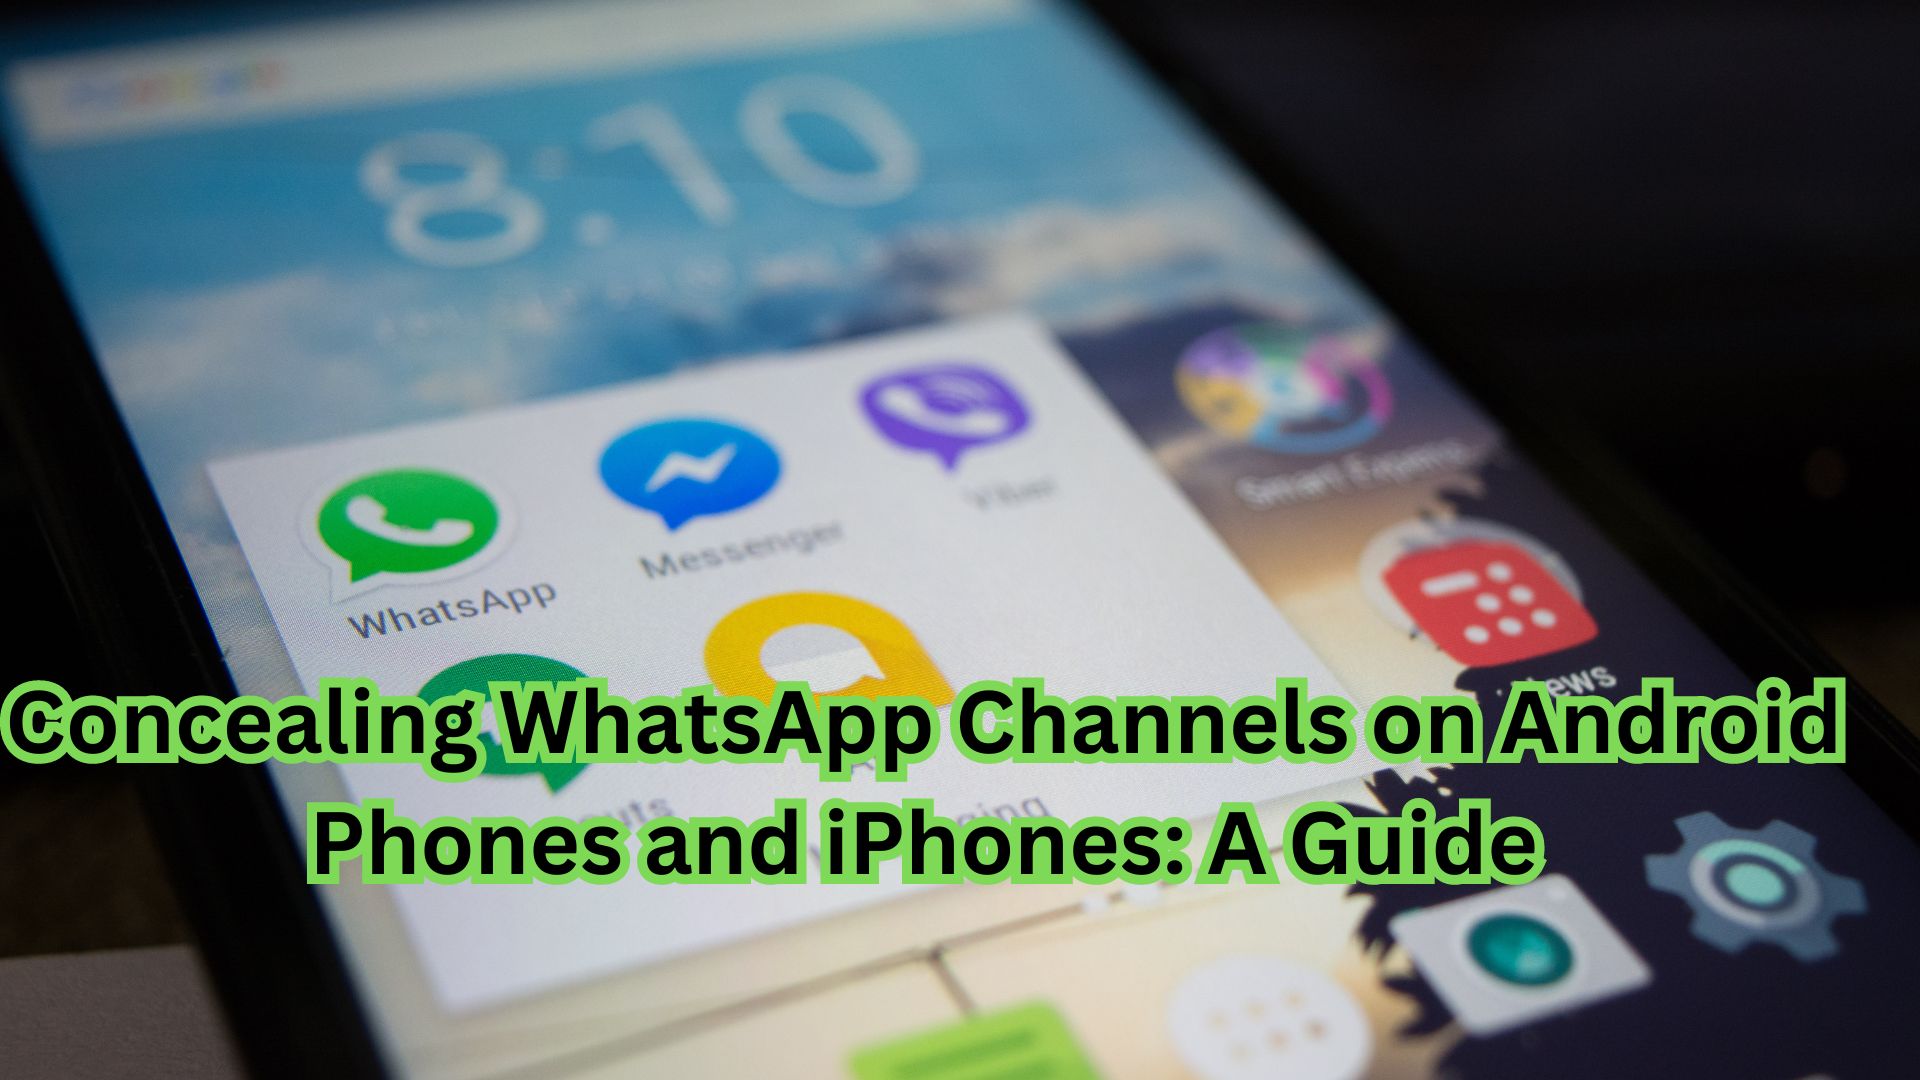 Concealing WhatsApp Channels on Android Phones and iPhones: A Guide